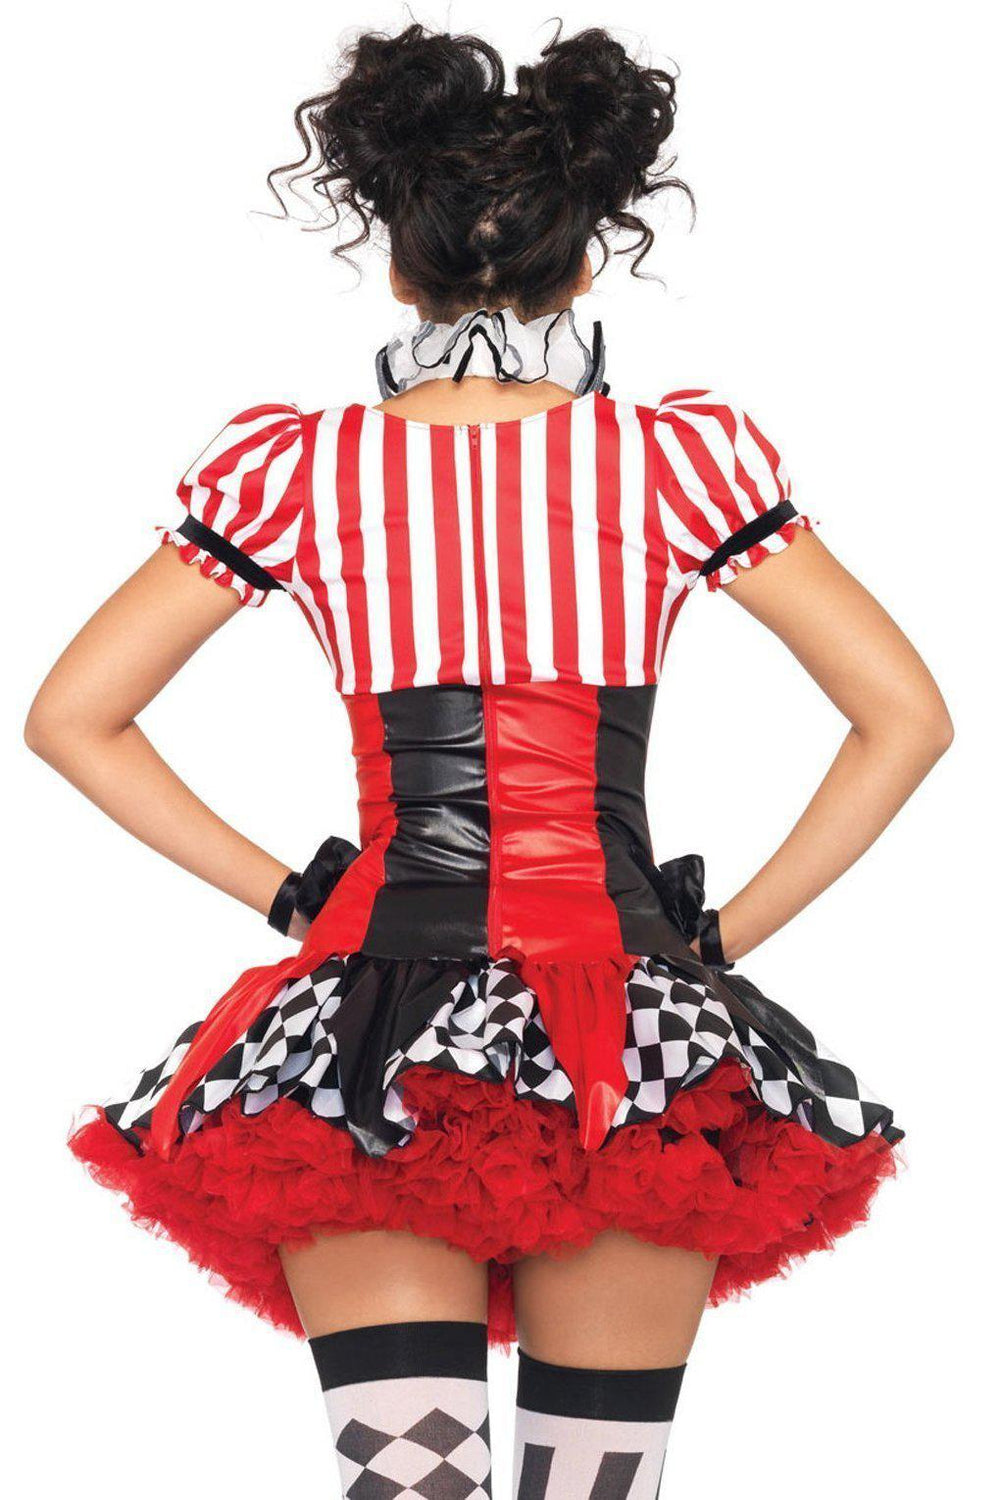 Harlequin Clown Costume-Other Costumes-Leg Avenue-SEXYSHOES.COM